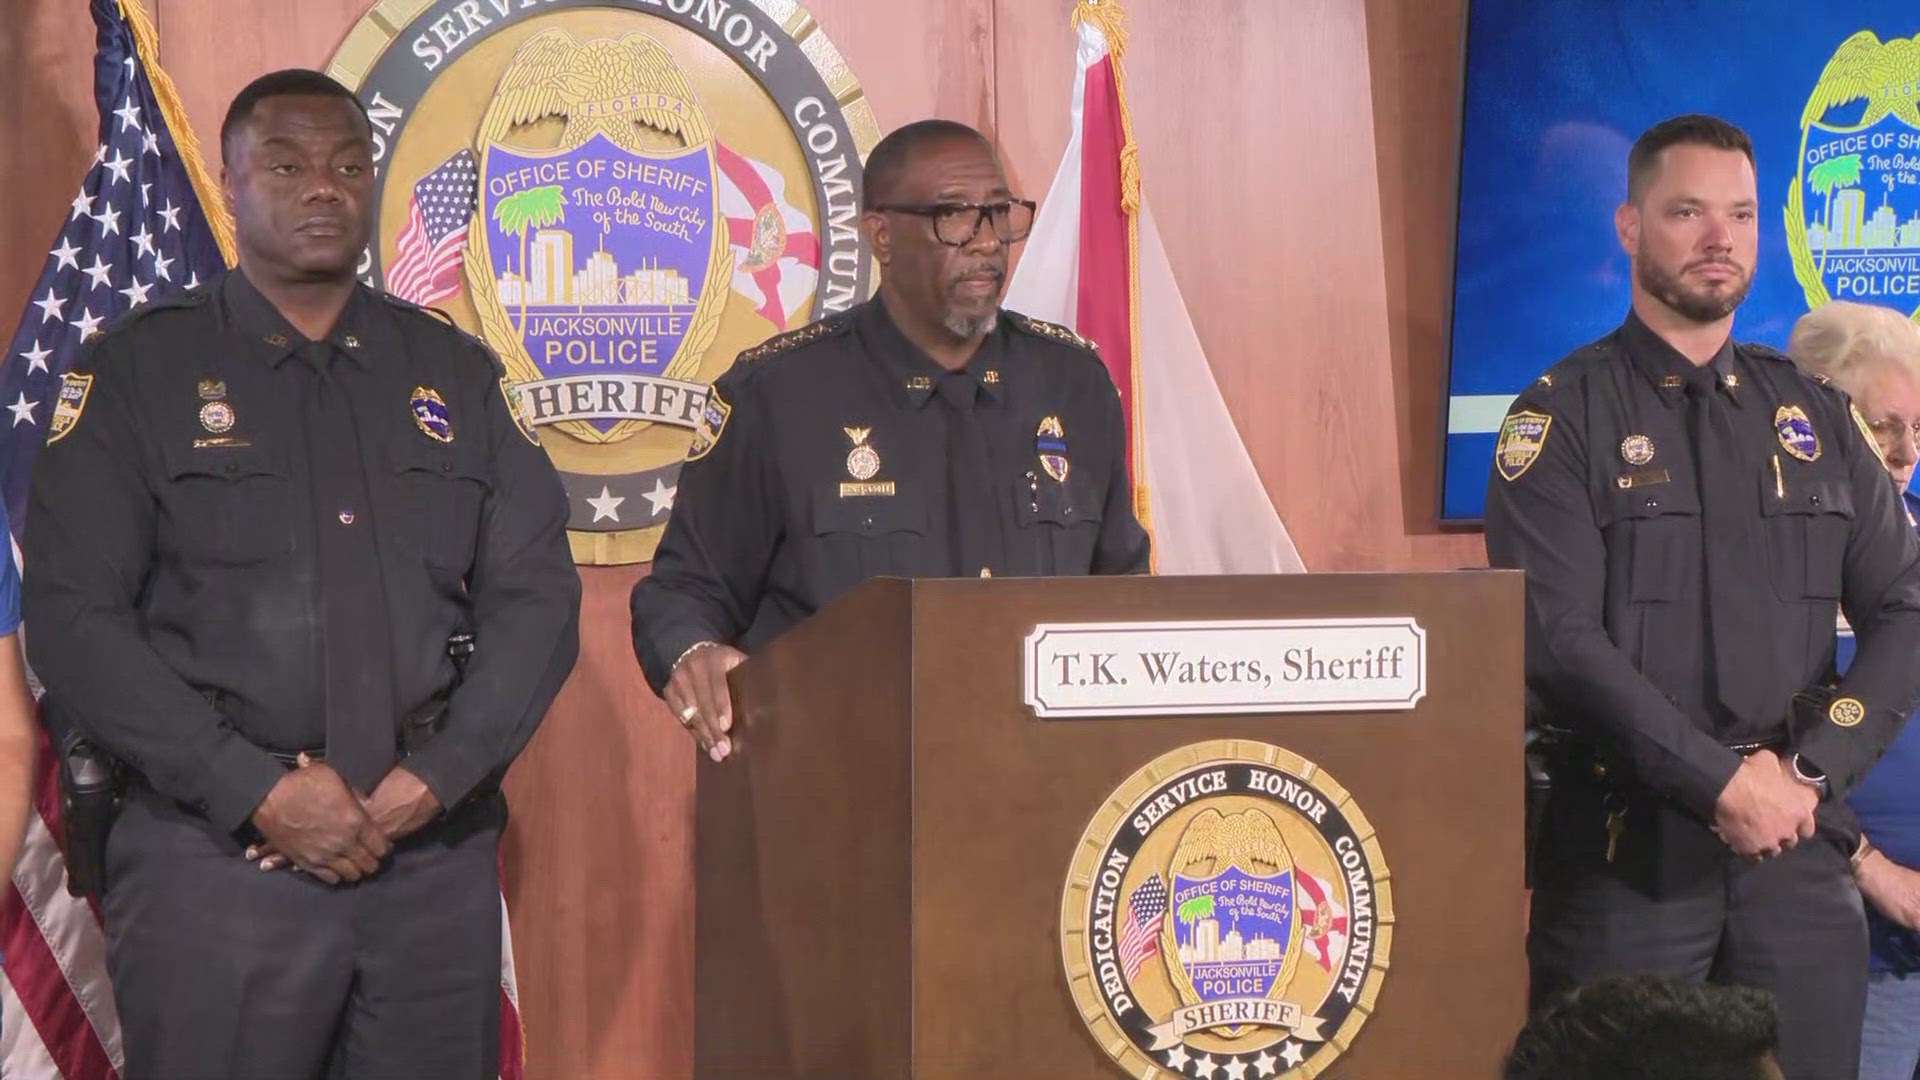 Jacksonville Sheriff T.K. Waters says the drug investigation began after a citizen reported "narcotics activity" concerns at sheriff's watch meeting in February.